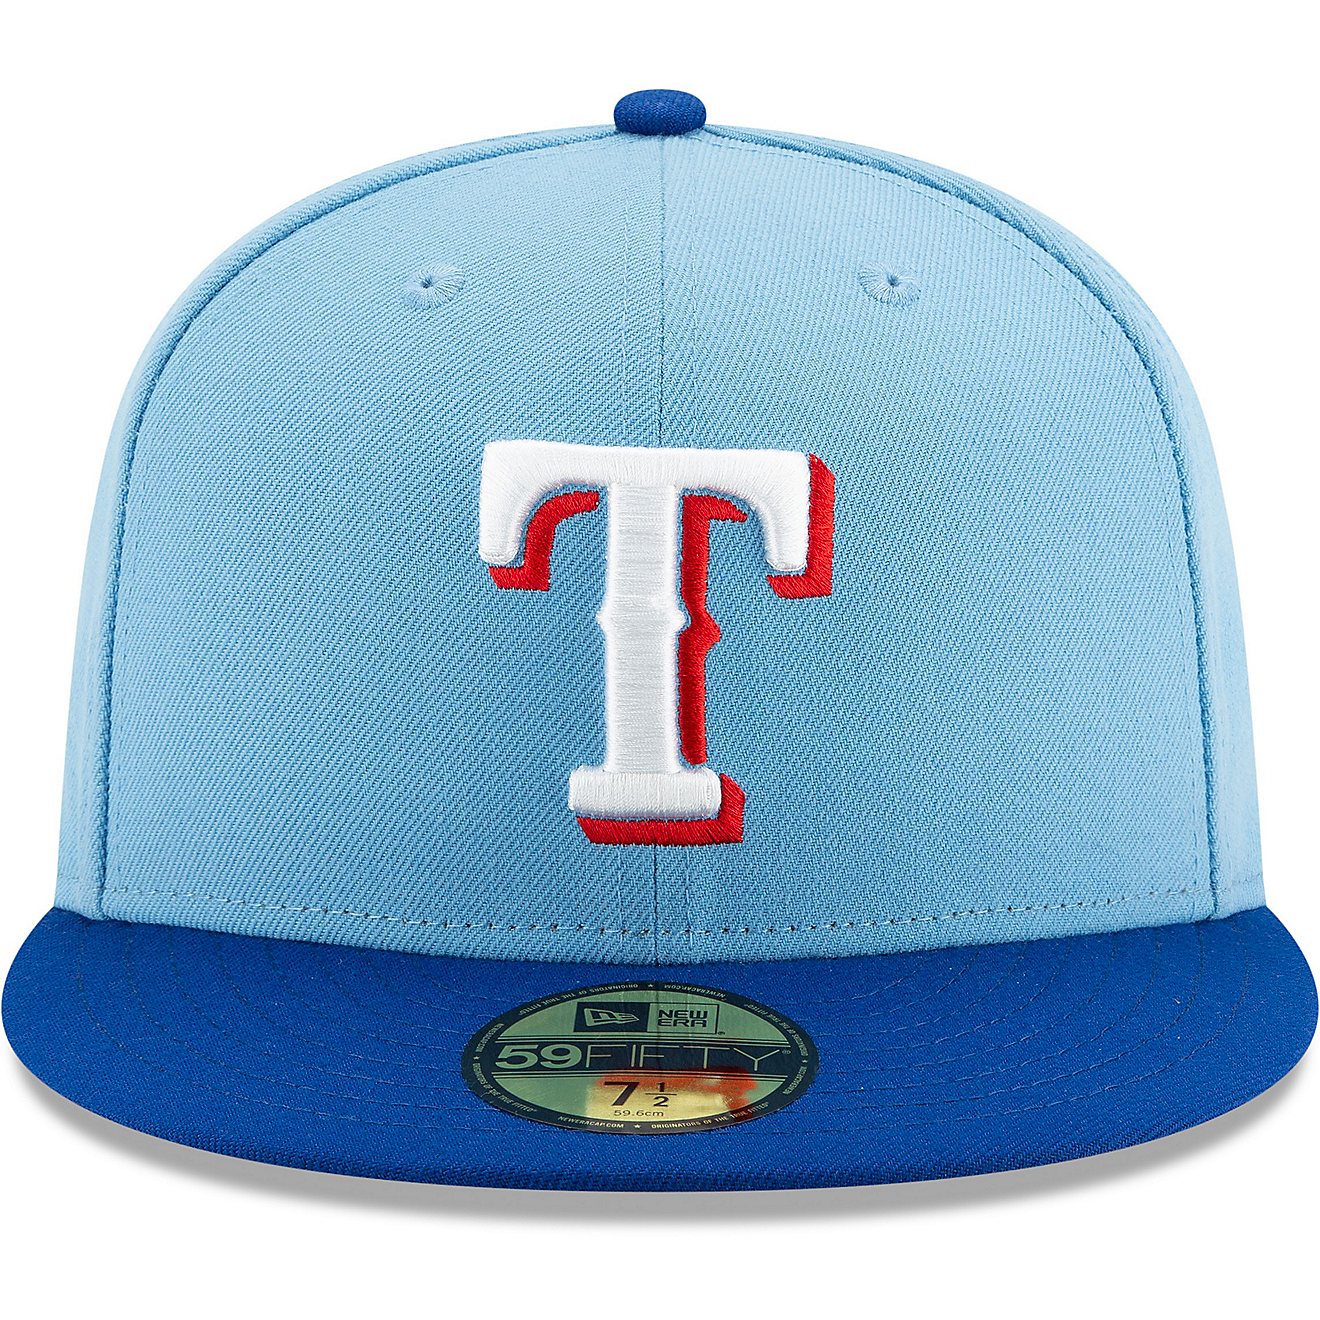 New Era Men's Texas Rangers Authentic Collection 59FIFTY Cap                                                                     - view number 2